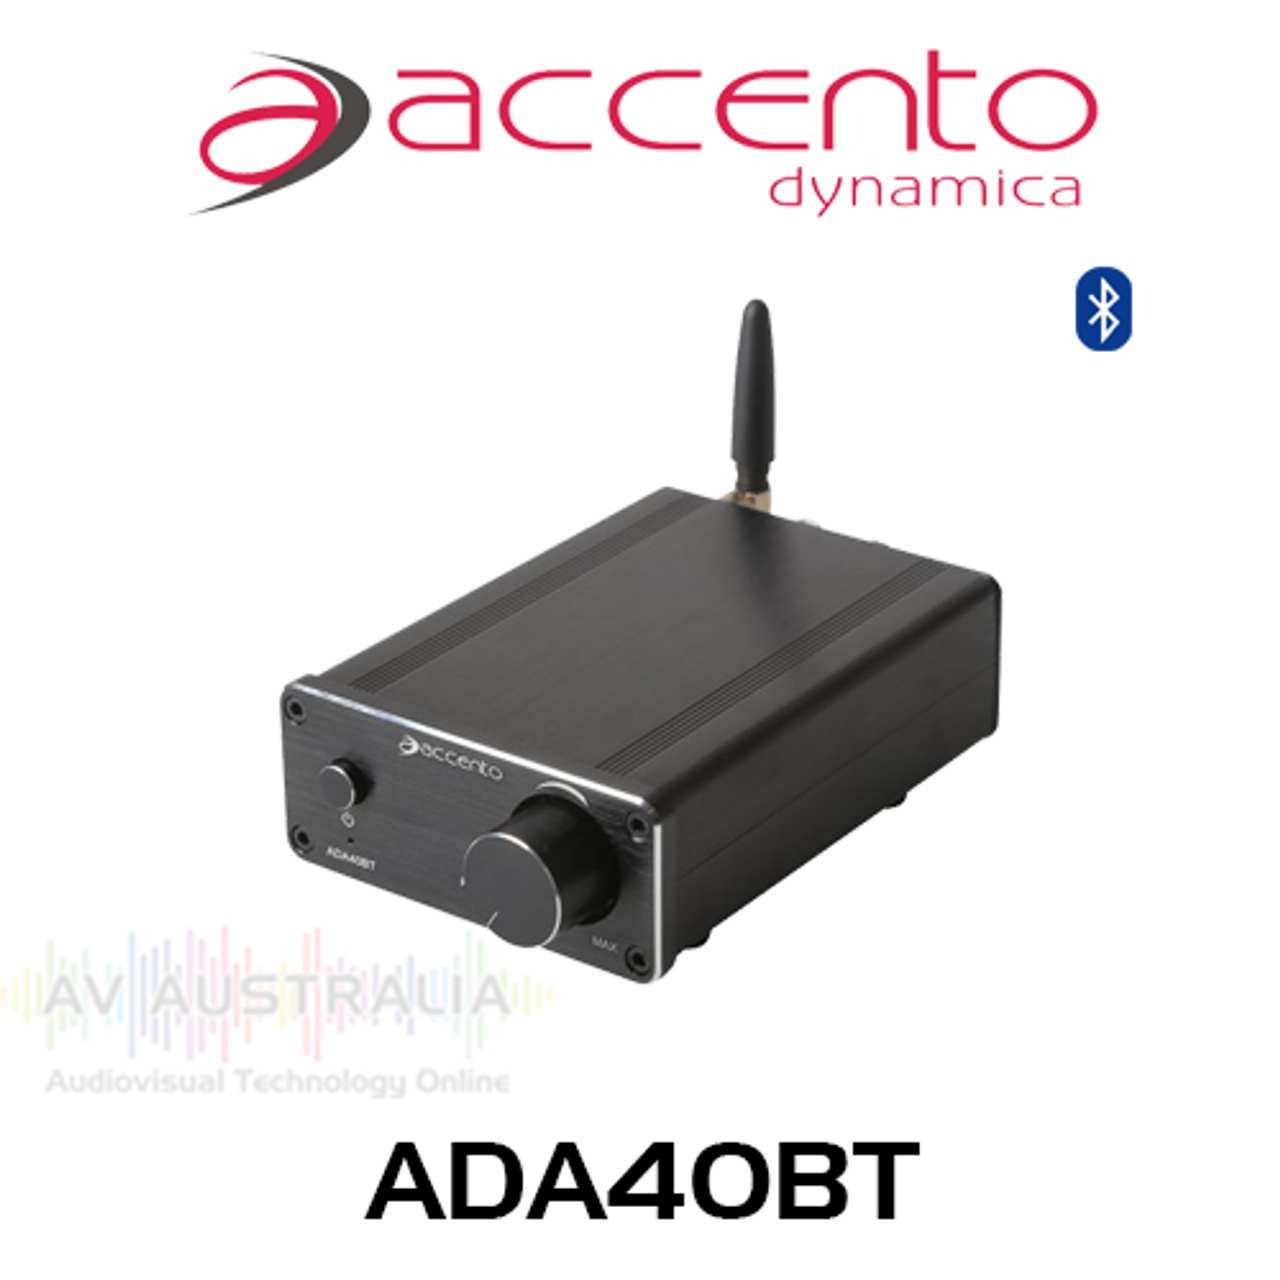 Accento Dynamica Compact 2x 20W RMS Class-D Stereo Amplifier with Bluetooth